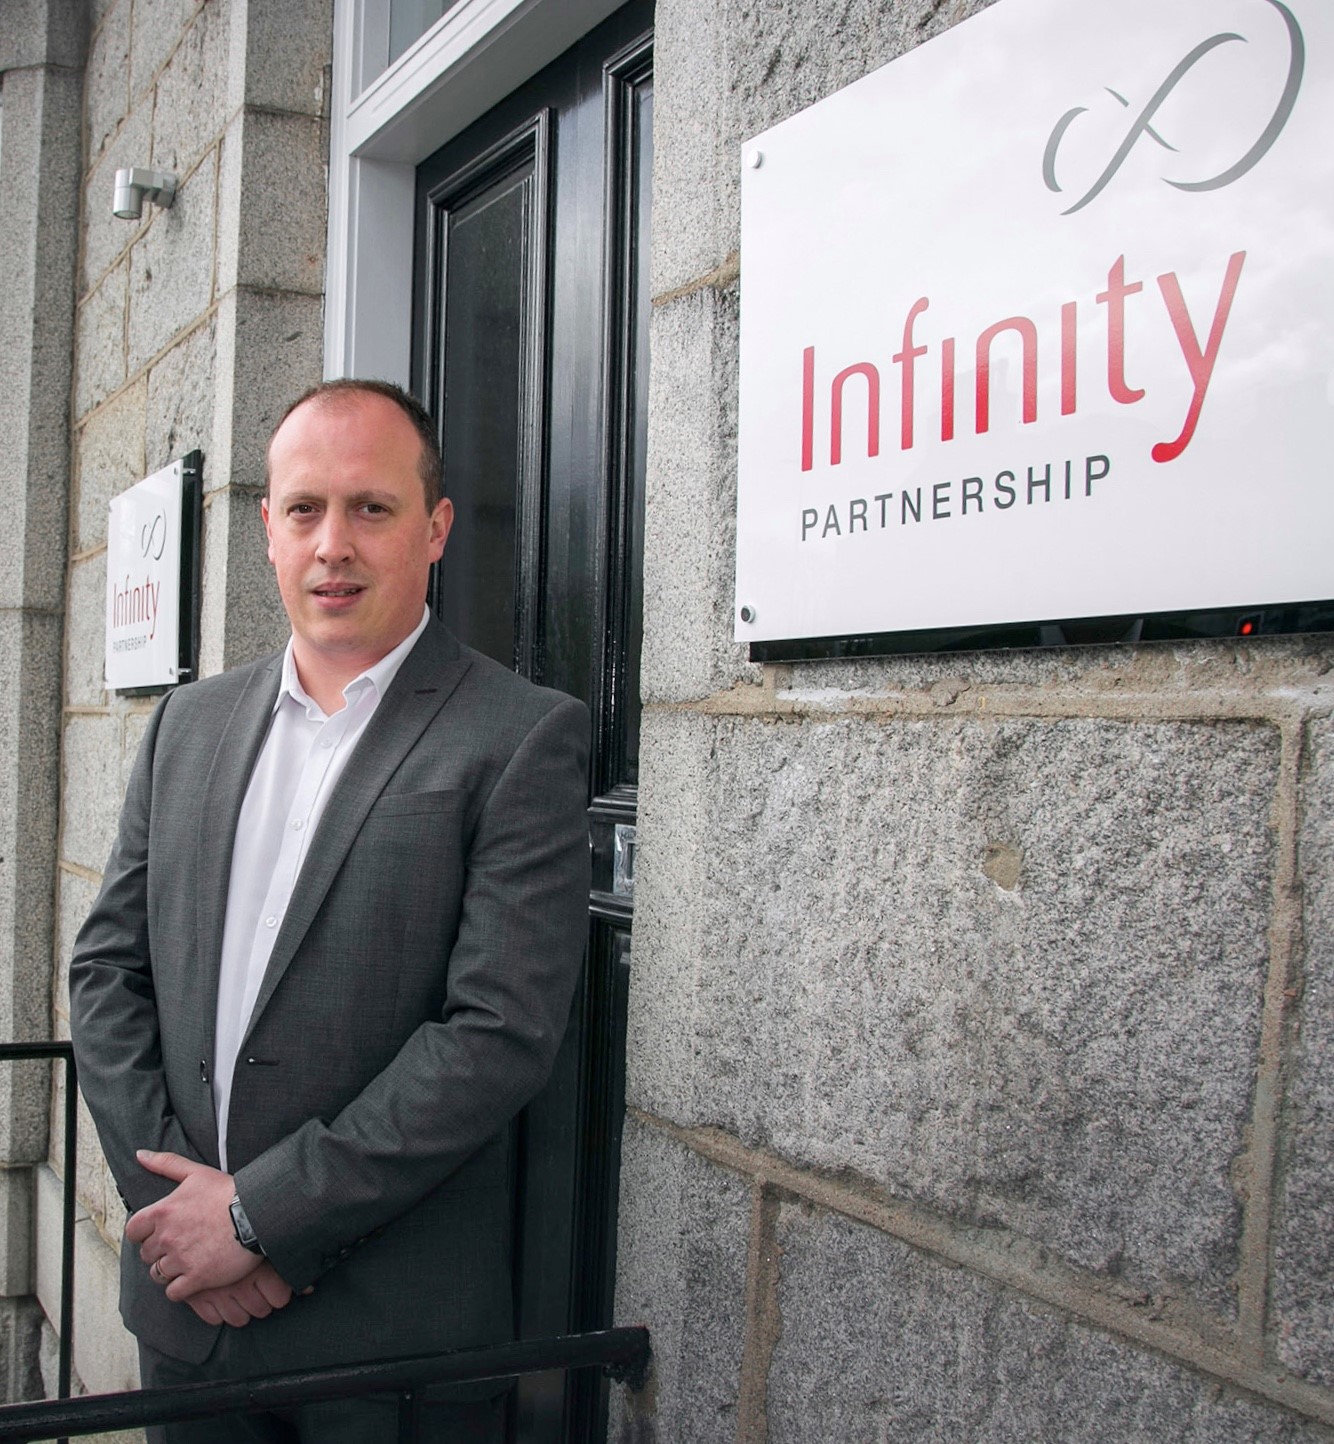 Infinity Partnership teams up with Aston Currency Management to extend client services